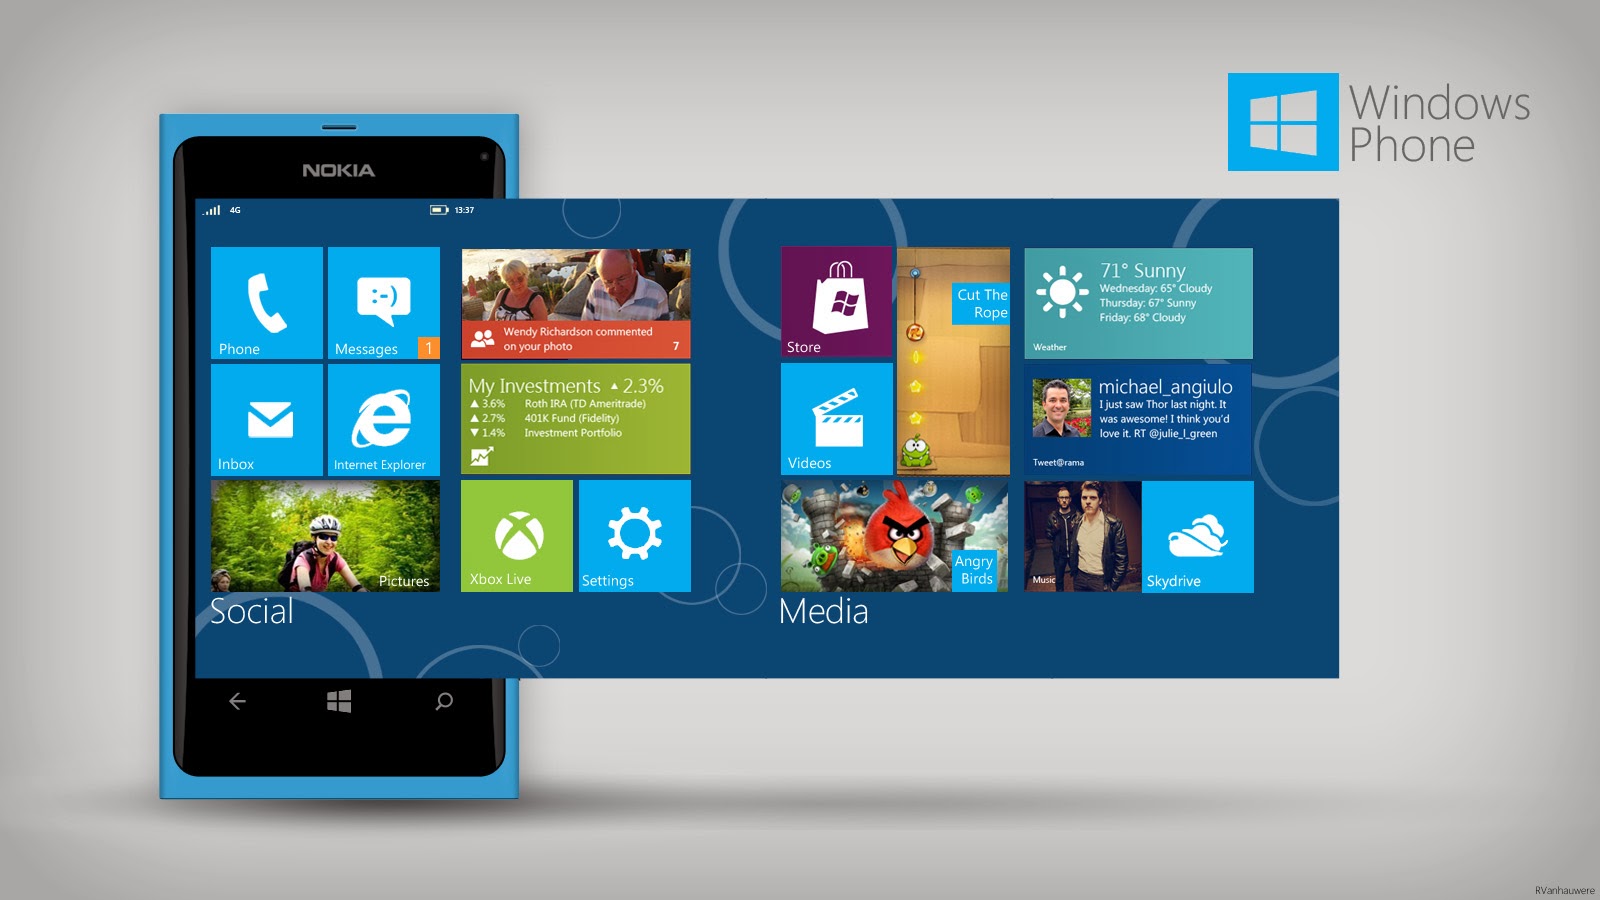 Find Out Some of the Most Prominent Mobile Applications for Windows 8